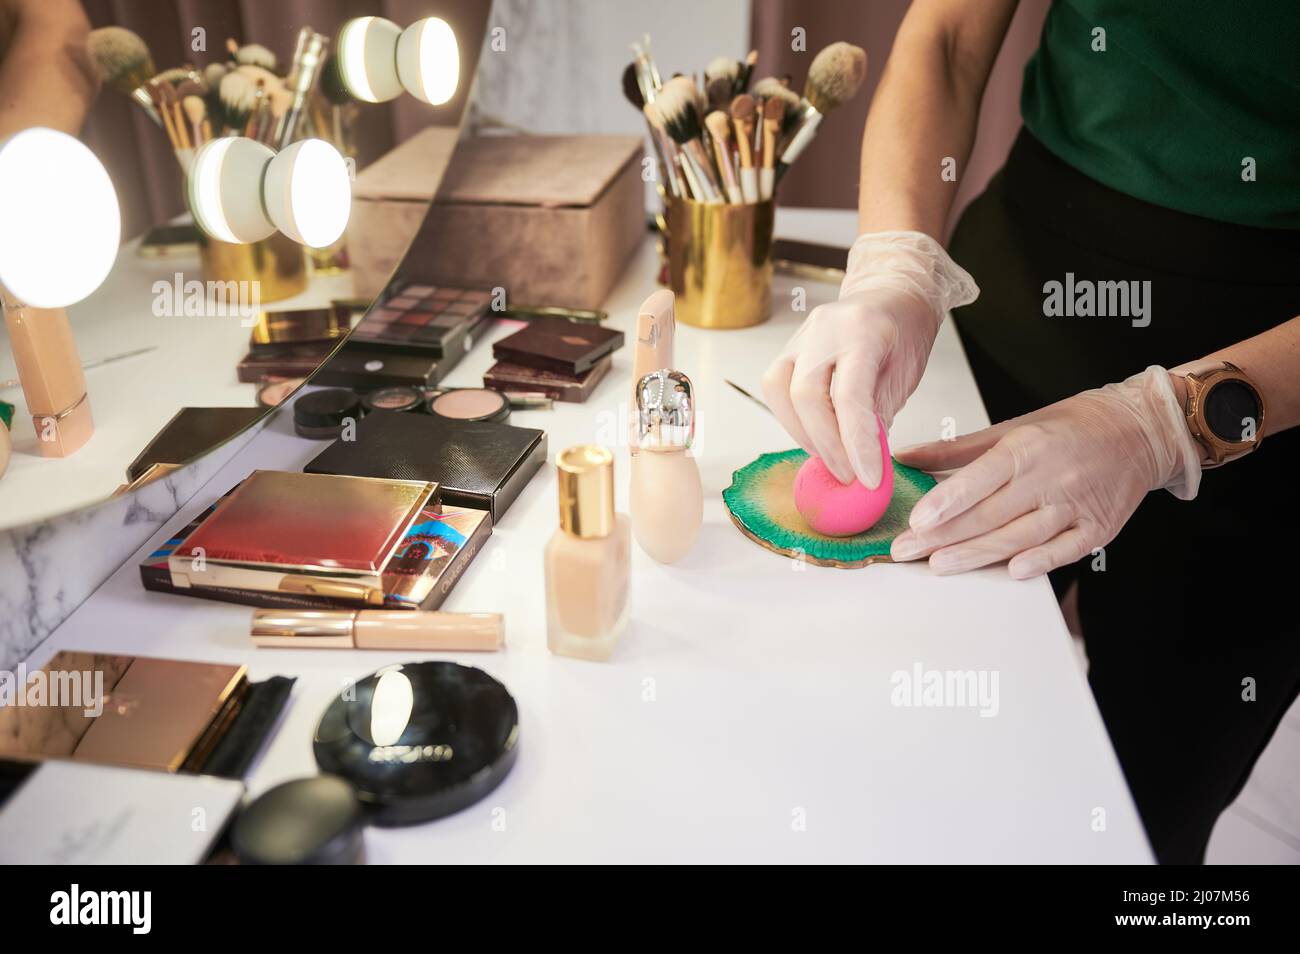 Close up of woman hands in sterile gloves preparing blending beauty sponge for applying foundation. Female makeup artist standing by dressing table with various cosmetics in beauty salon. Stock Photo